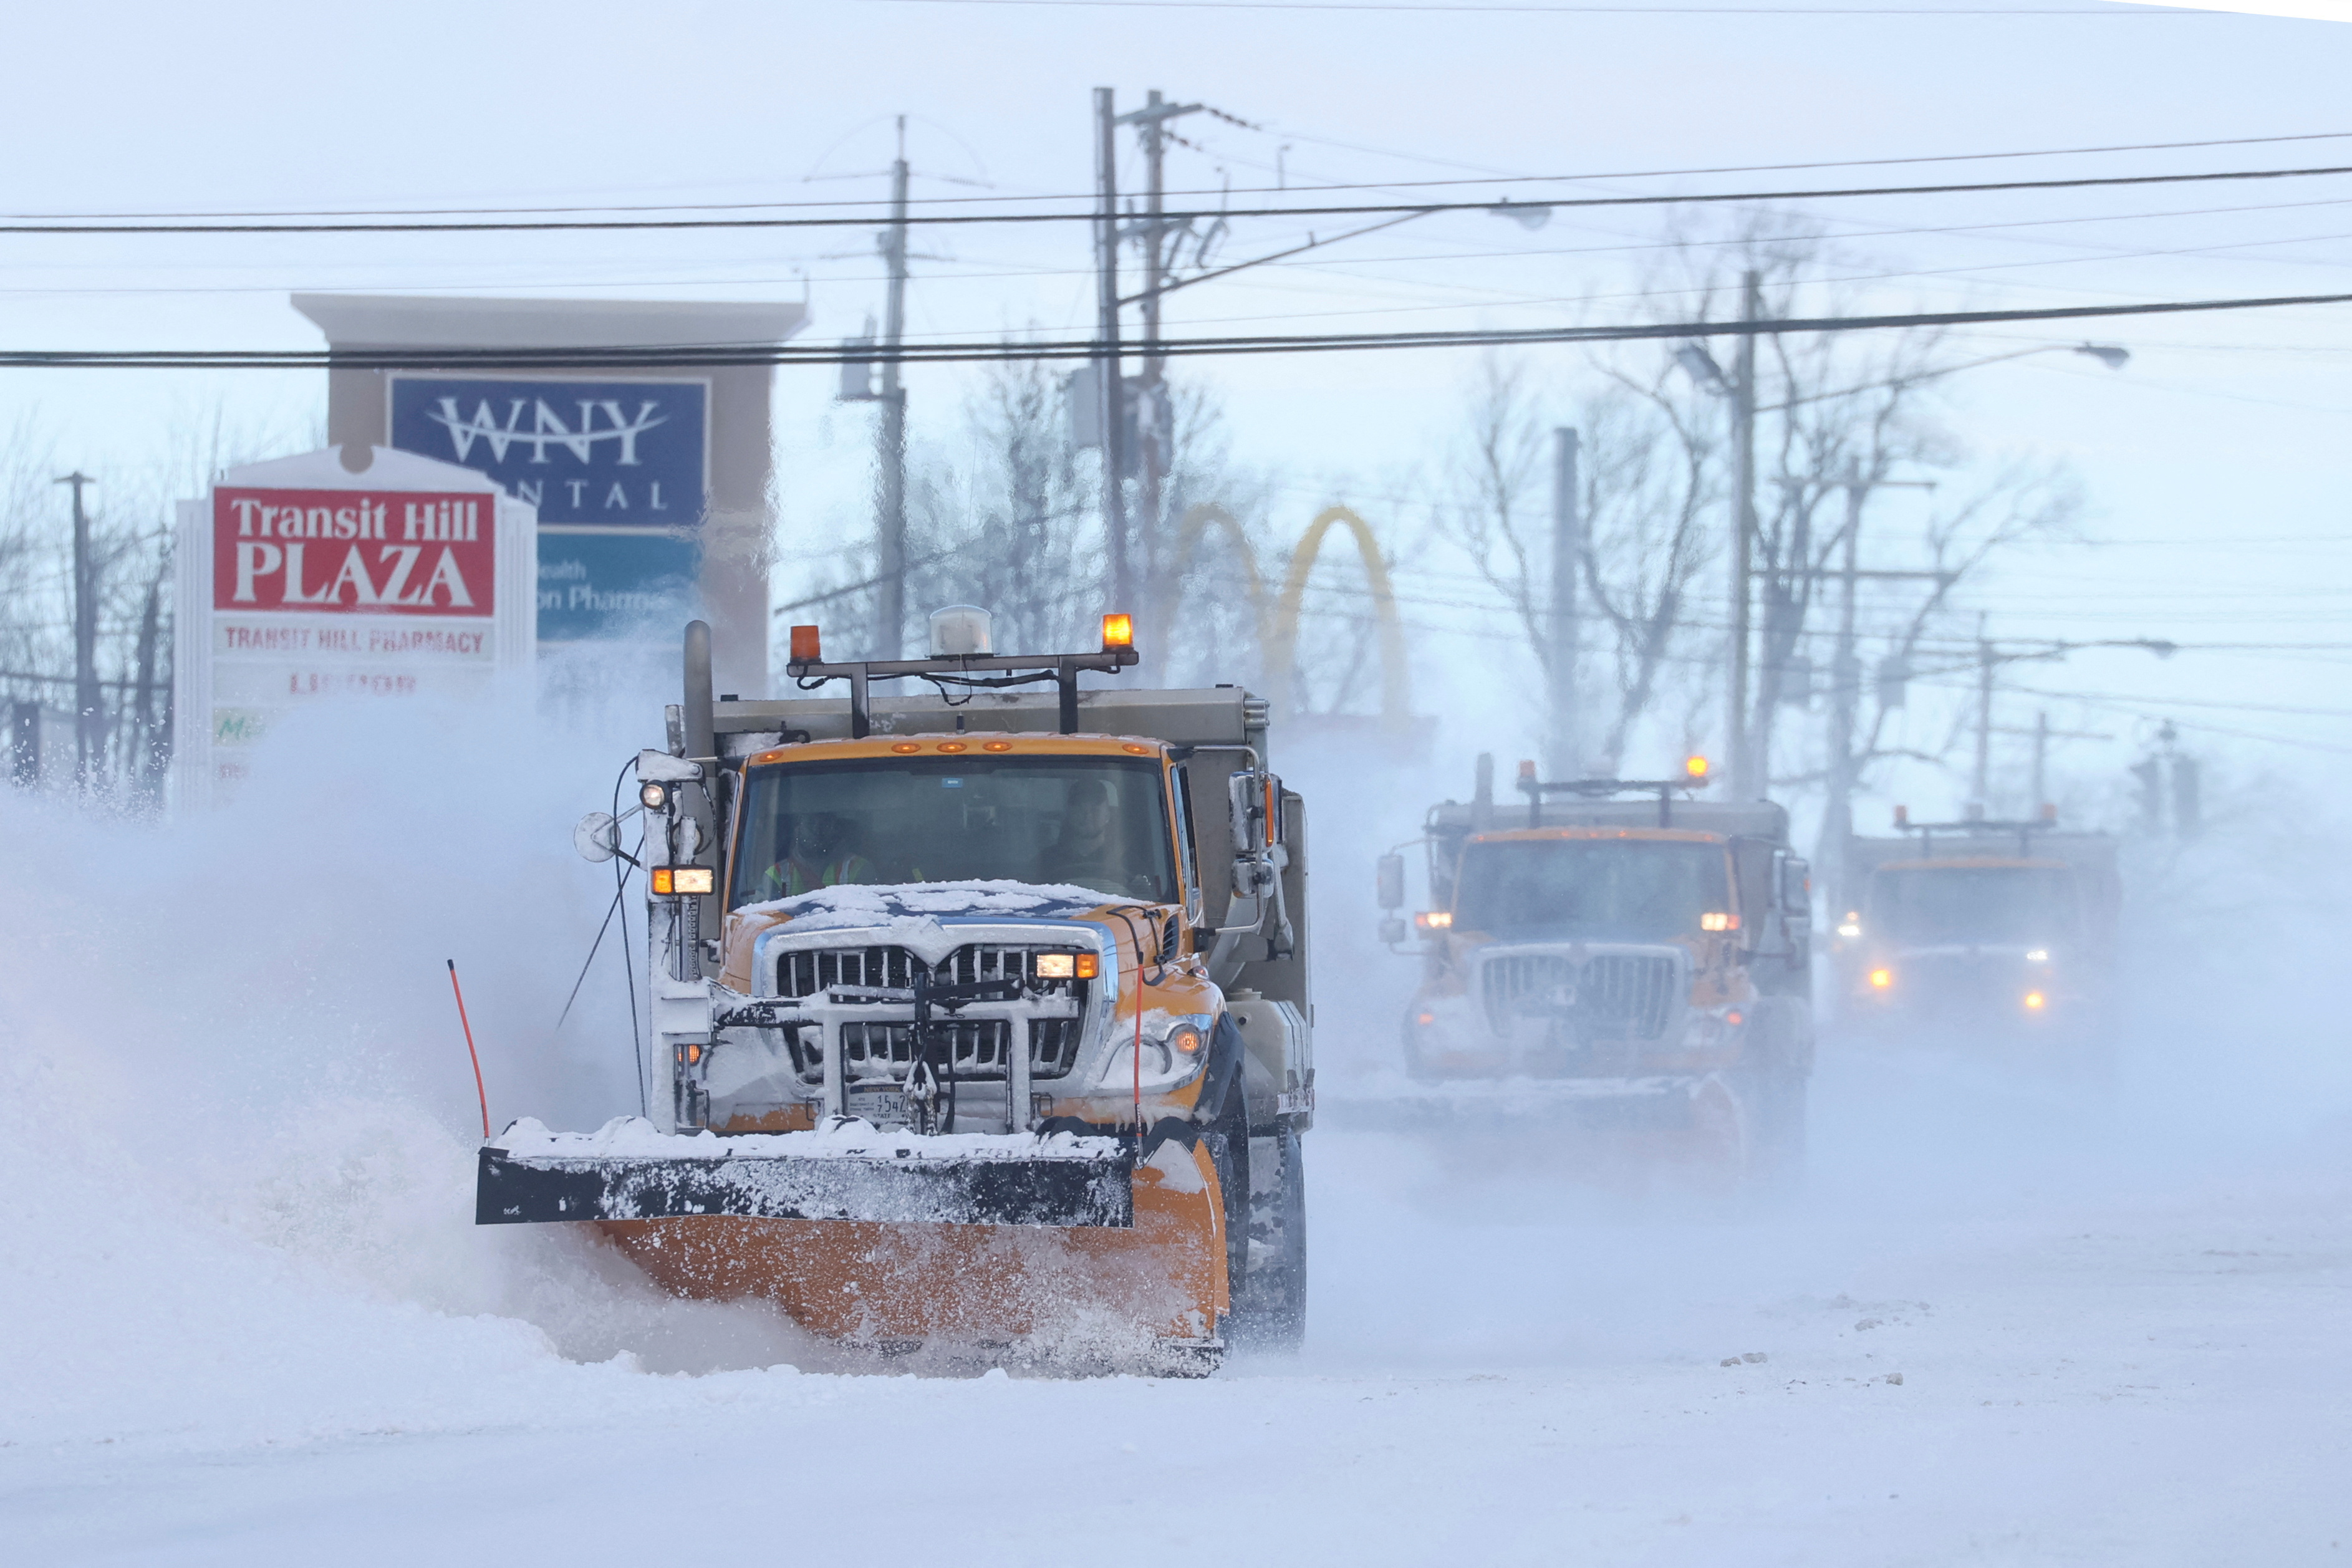 Once-in-a-lifetime' blizzard kills at least 27 in western New York